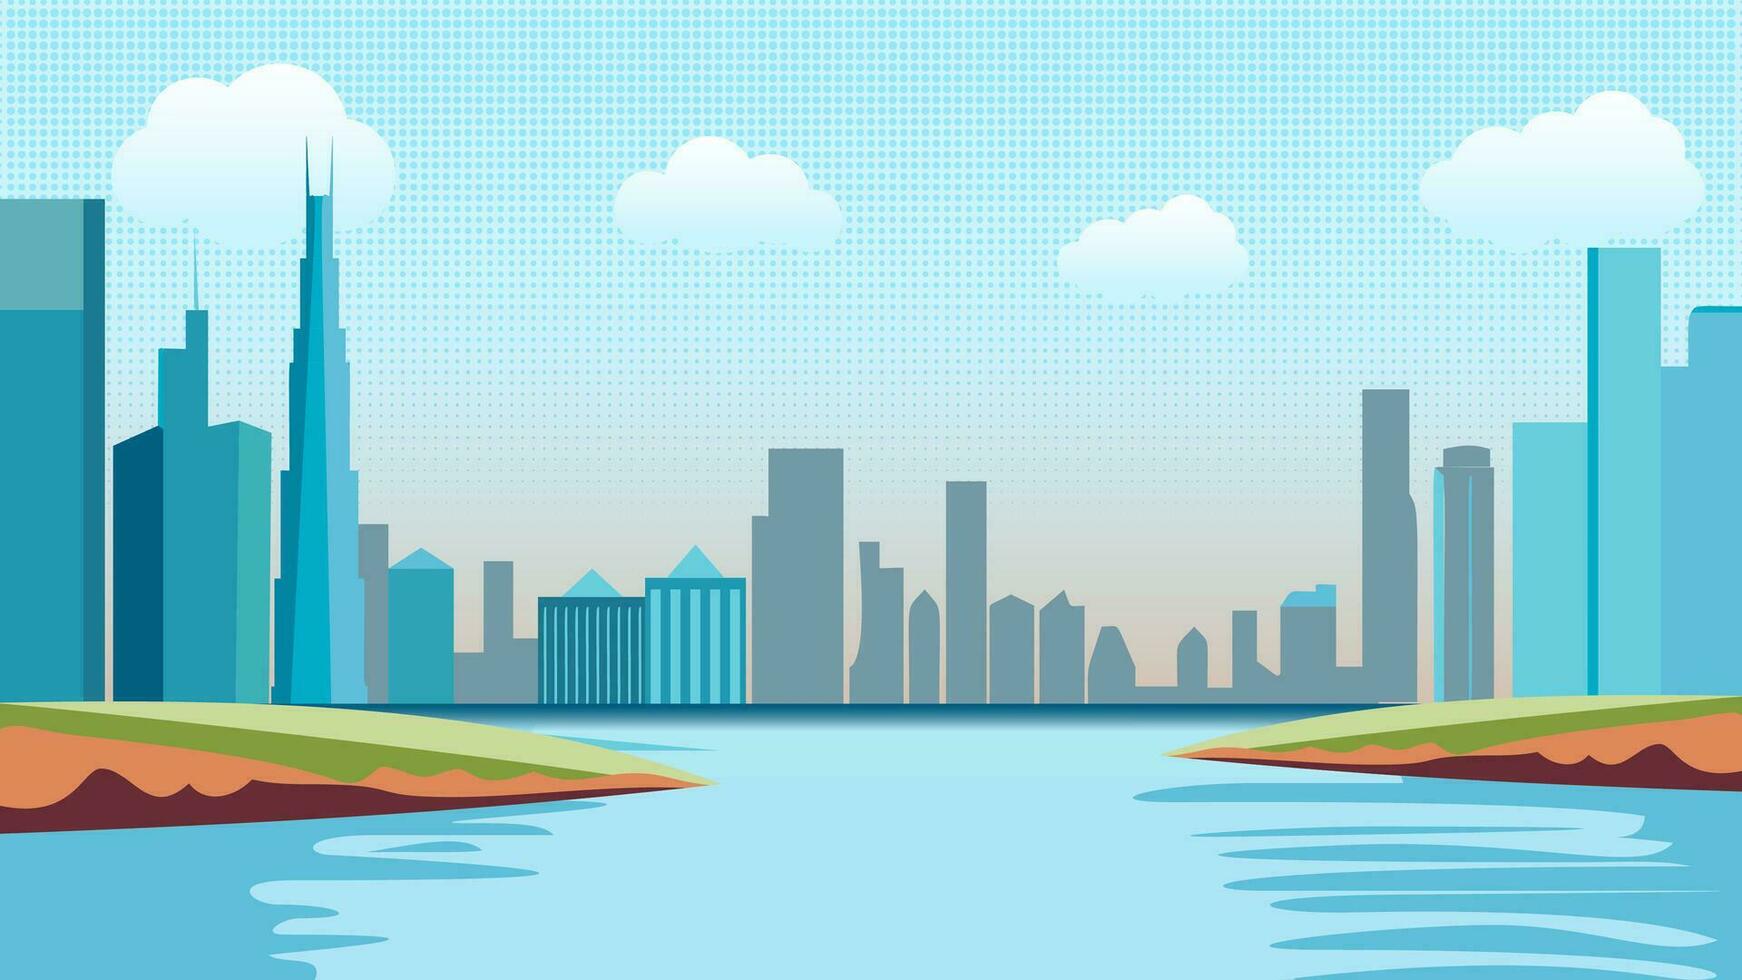 Empty space background, city scape with river or lake. Simple cartoon illustration vector